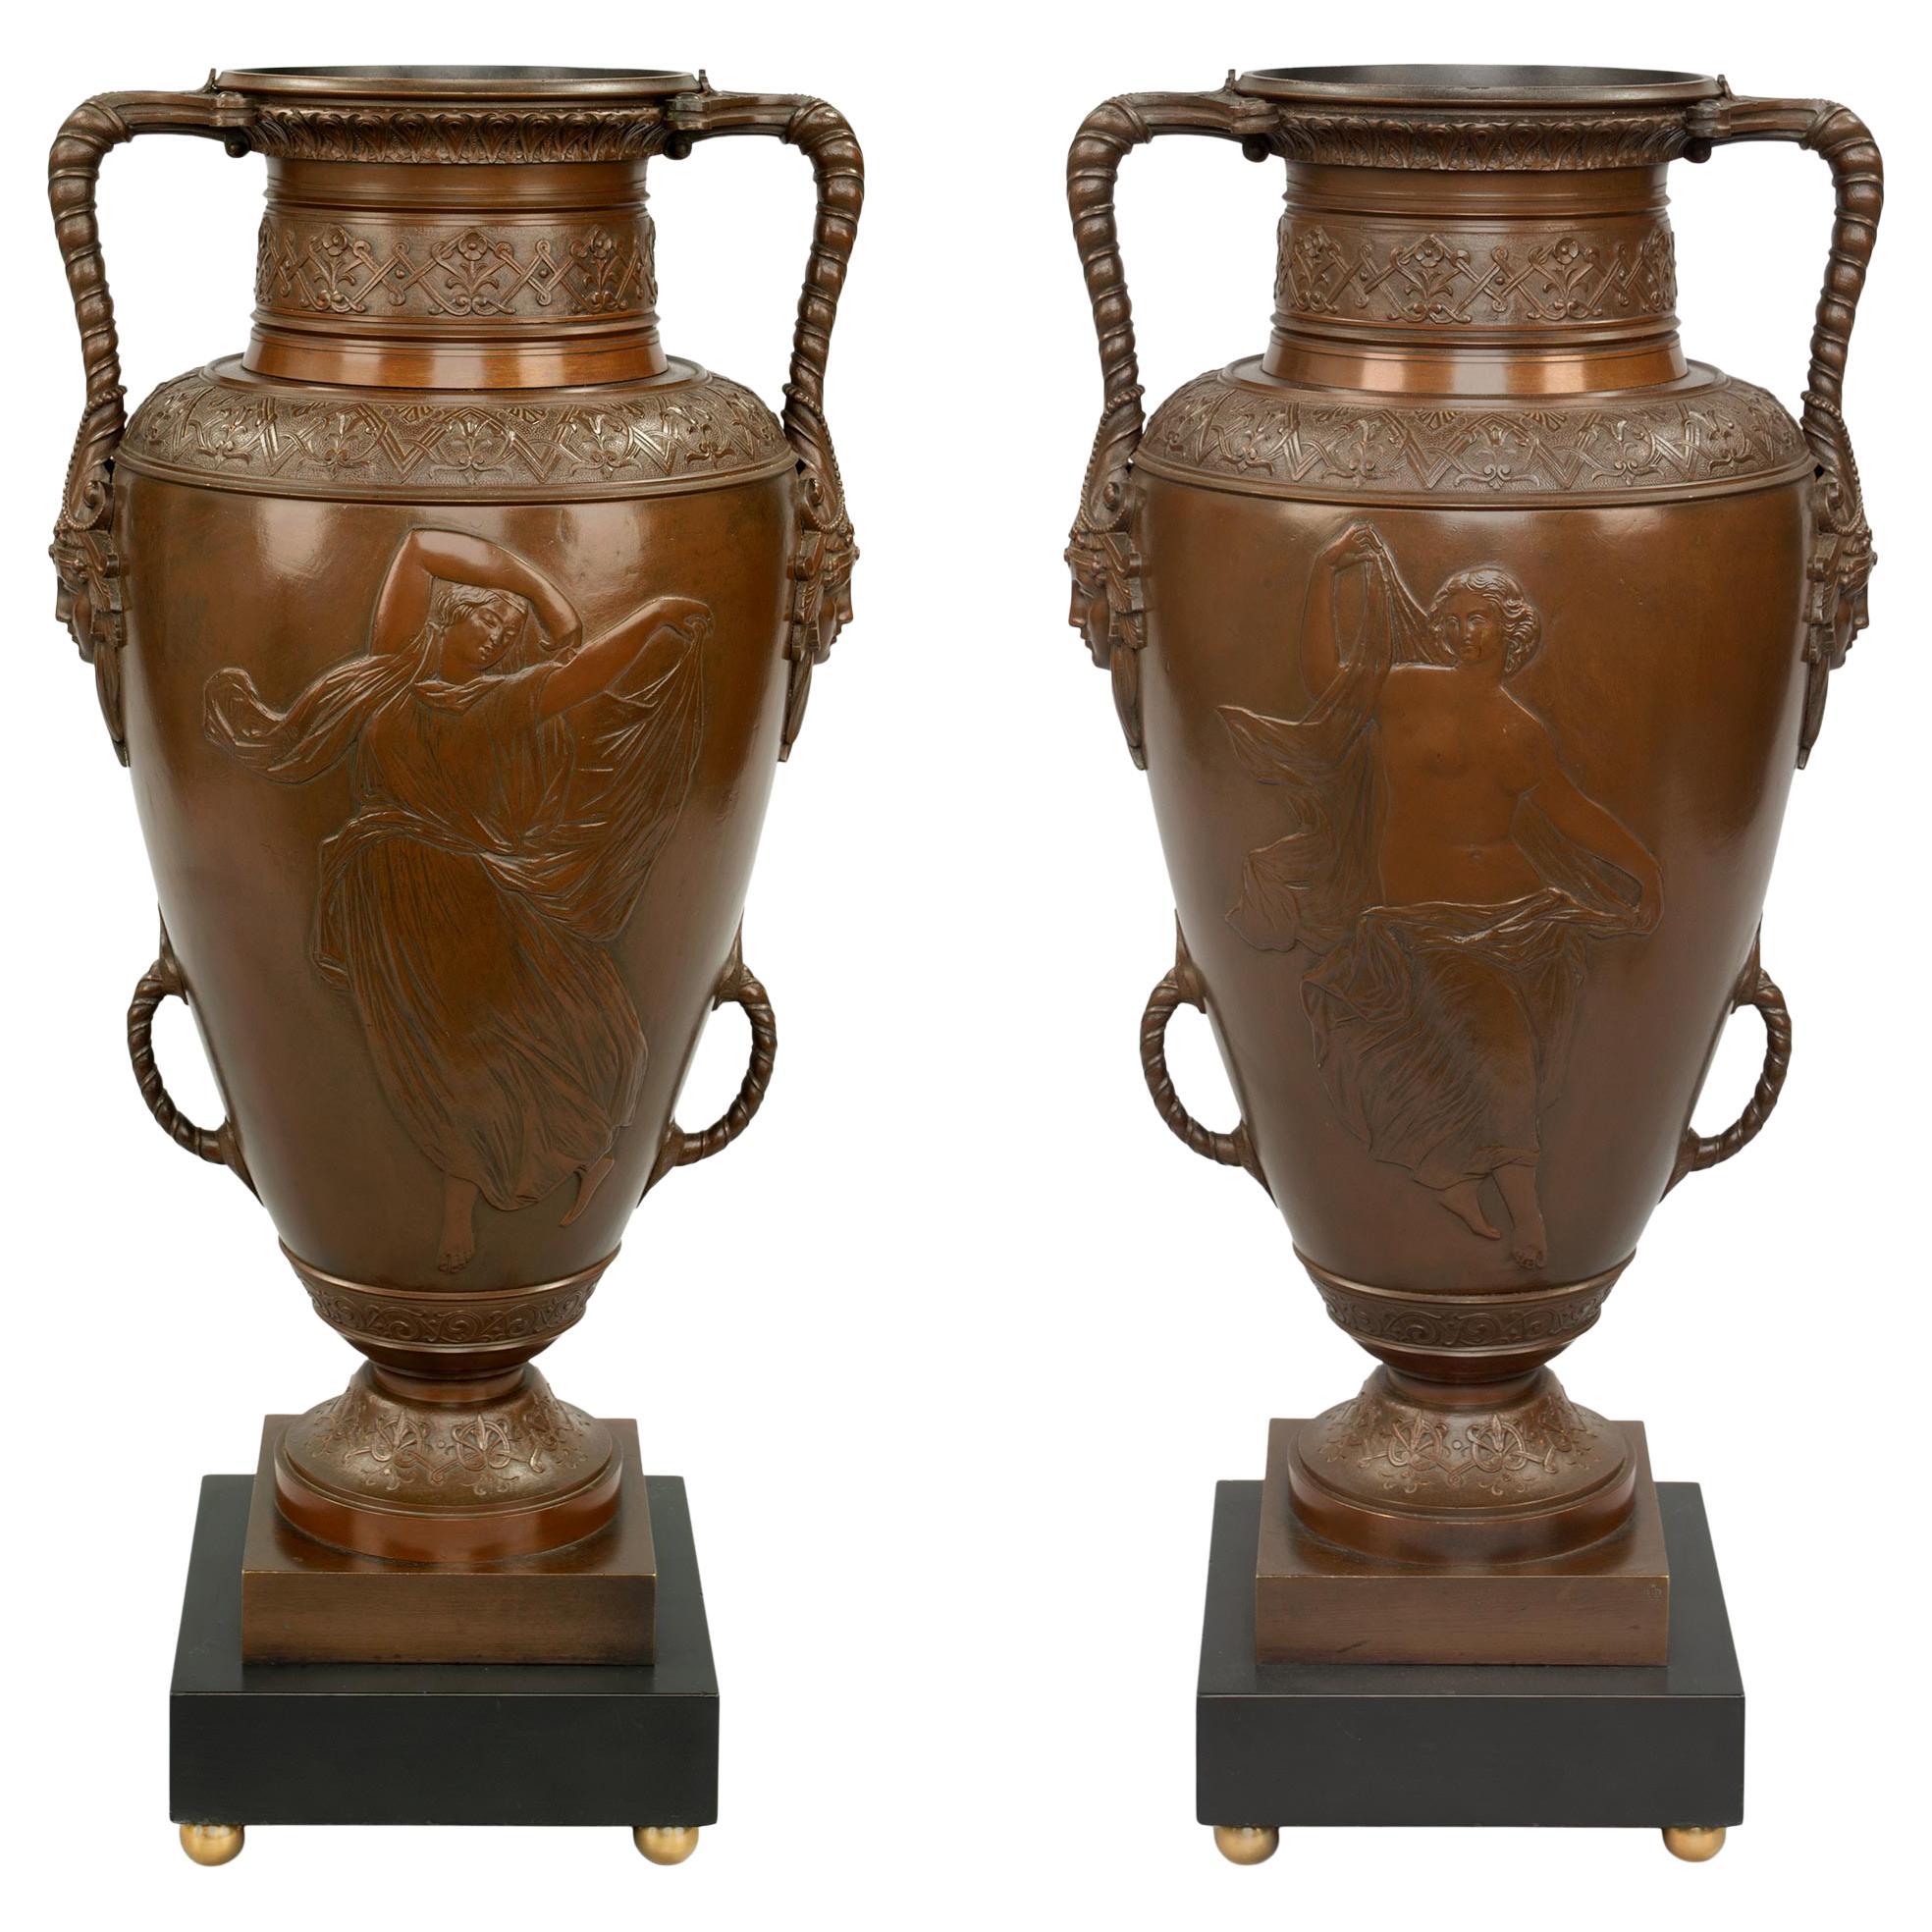 Pair of French 19th Century Neoclassical Patinated Bronze Marble and Ormolu Urns